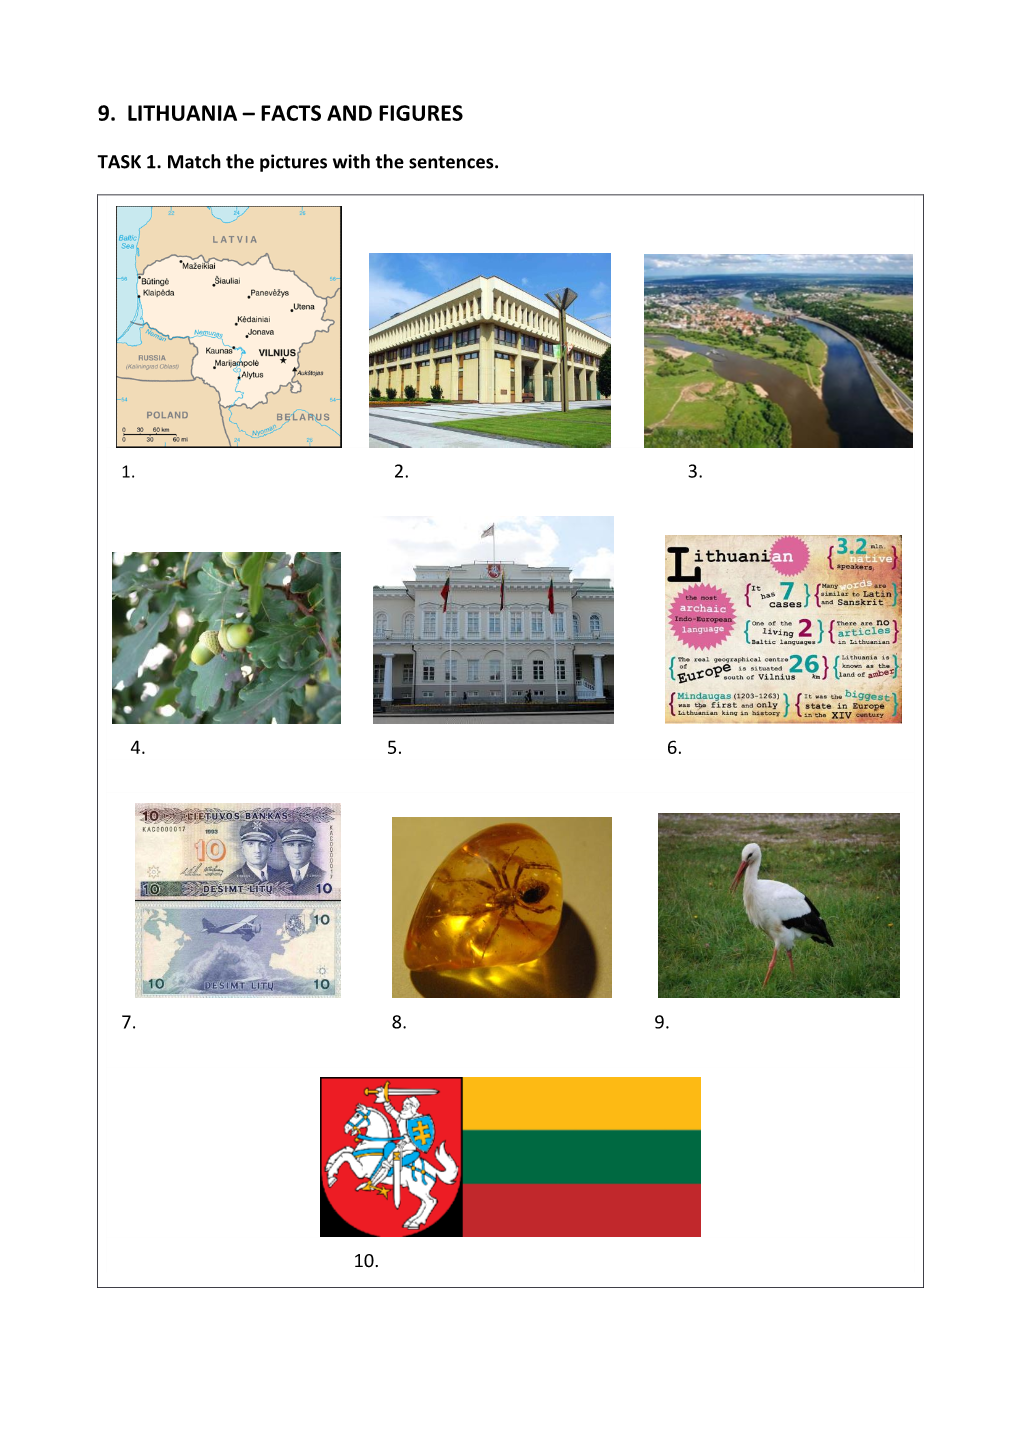 Lithuania – Facts and Figures